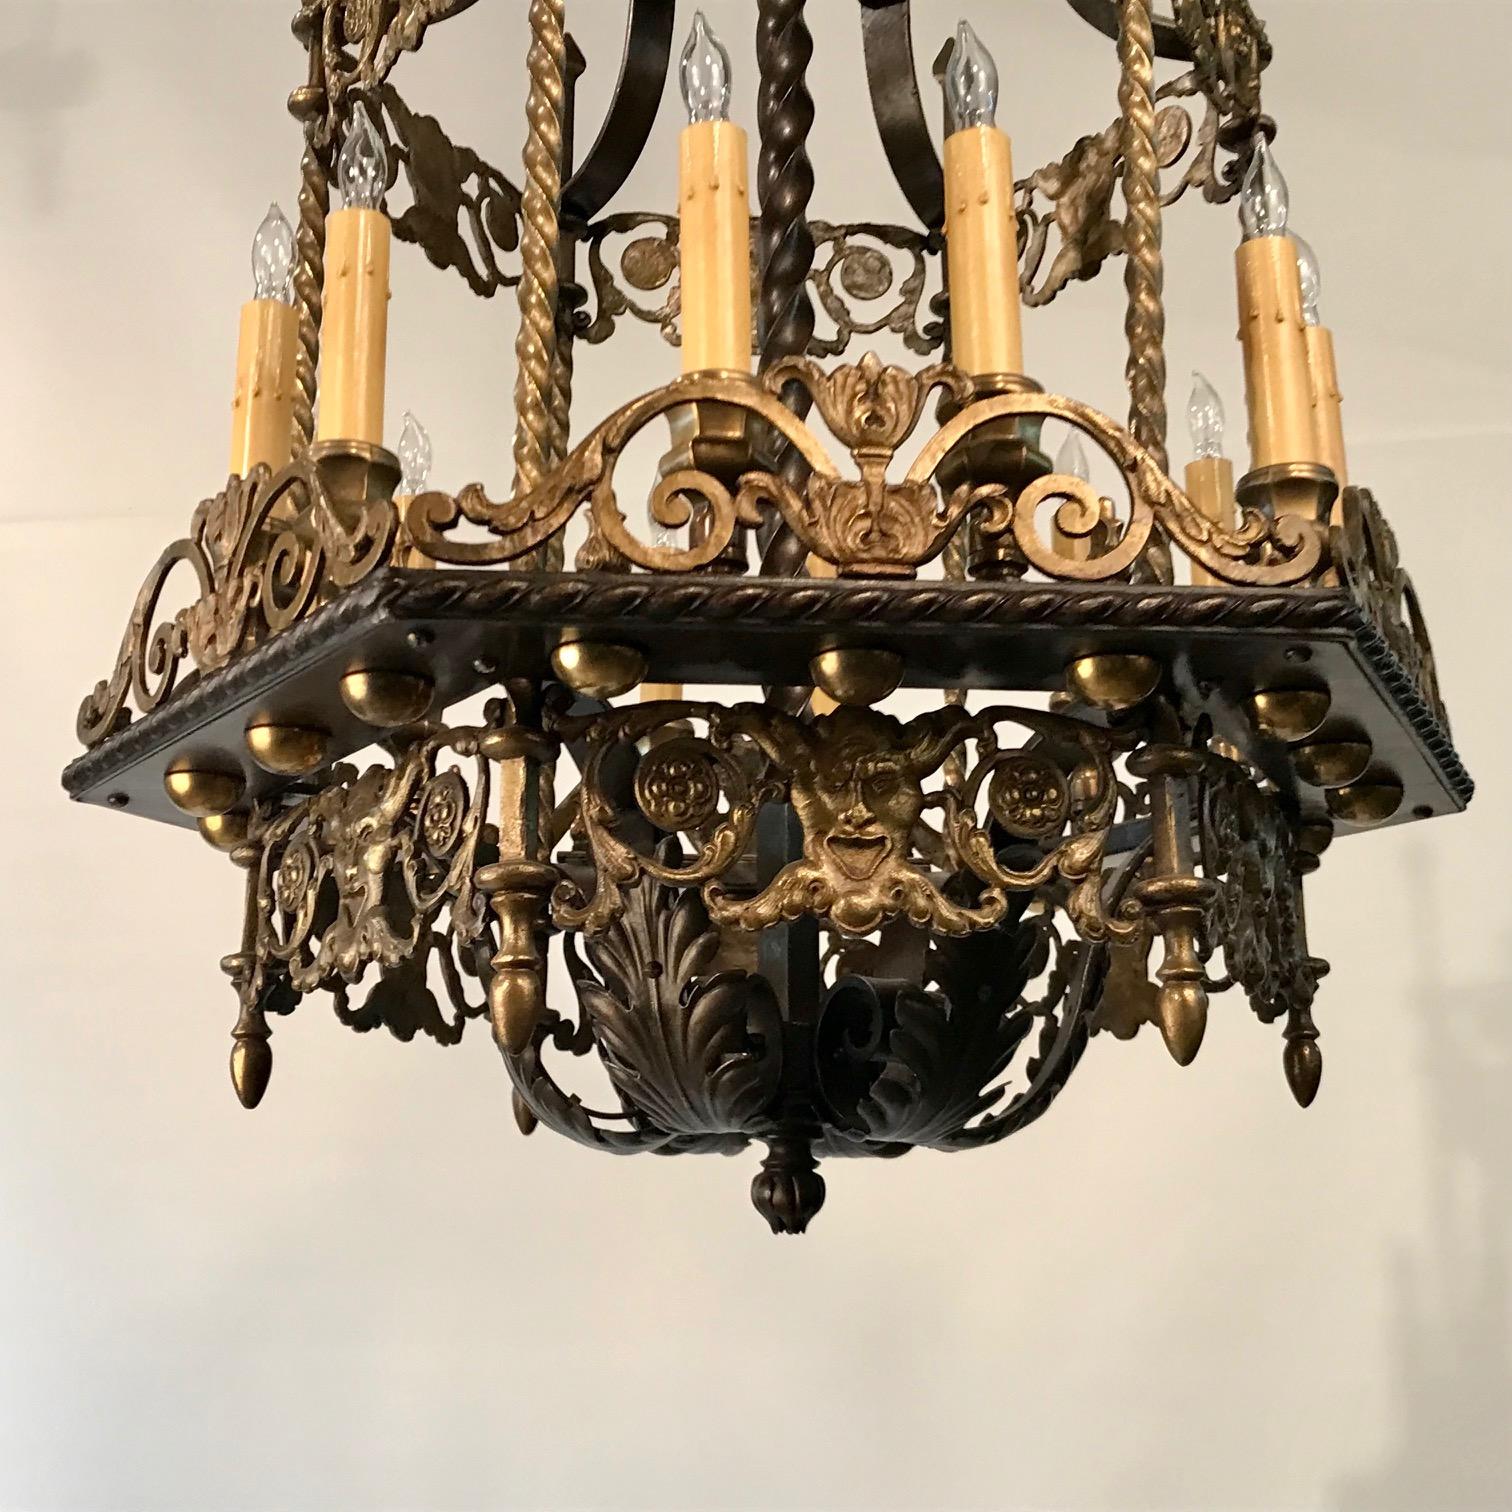 An Antique 12 Light Neo-Renaissance  Bronze and Wrought Iron Chandelier For Sale 4